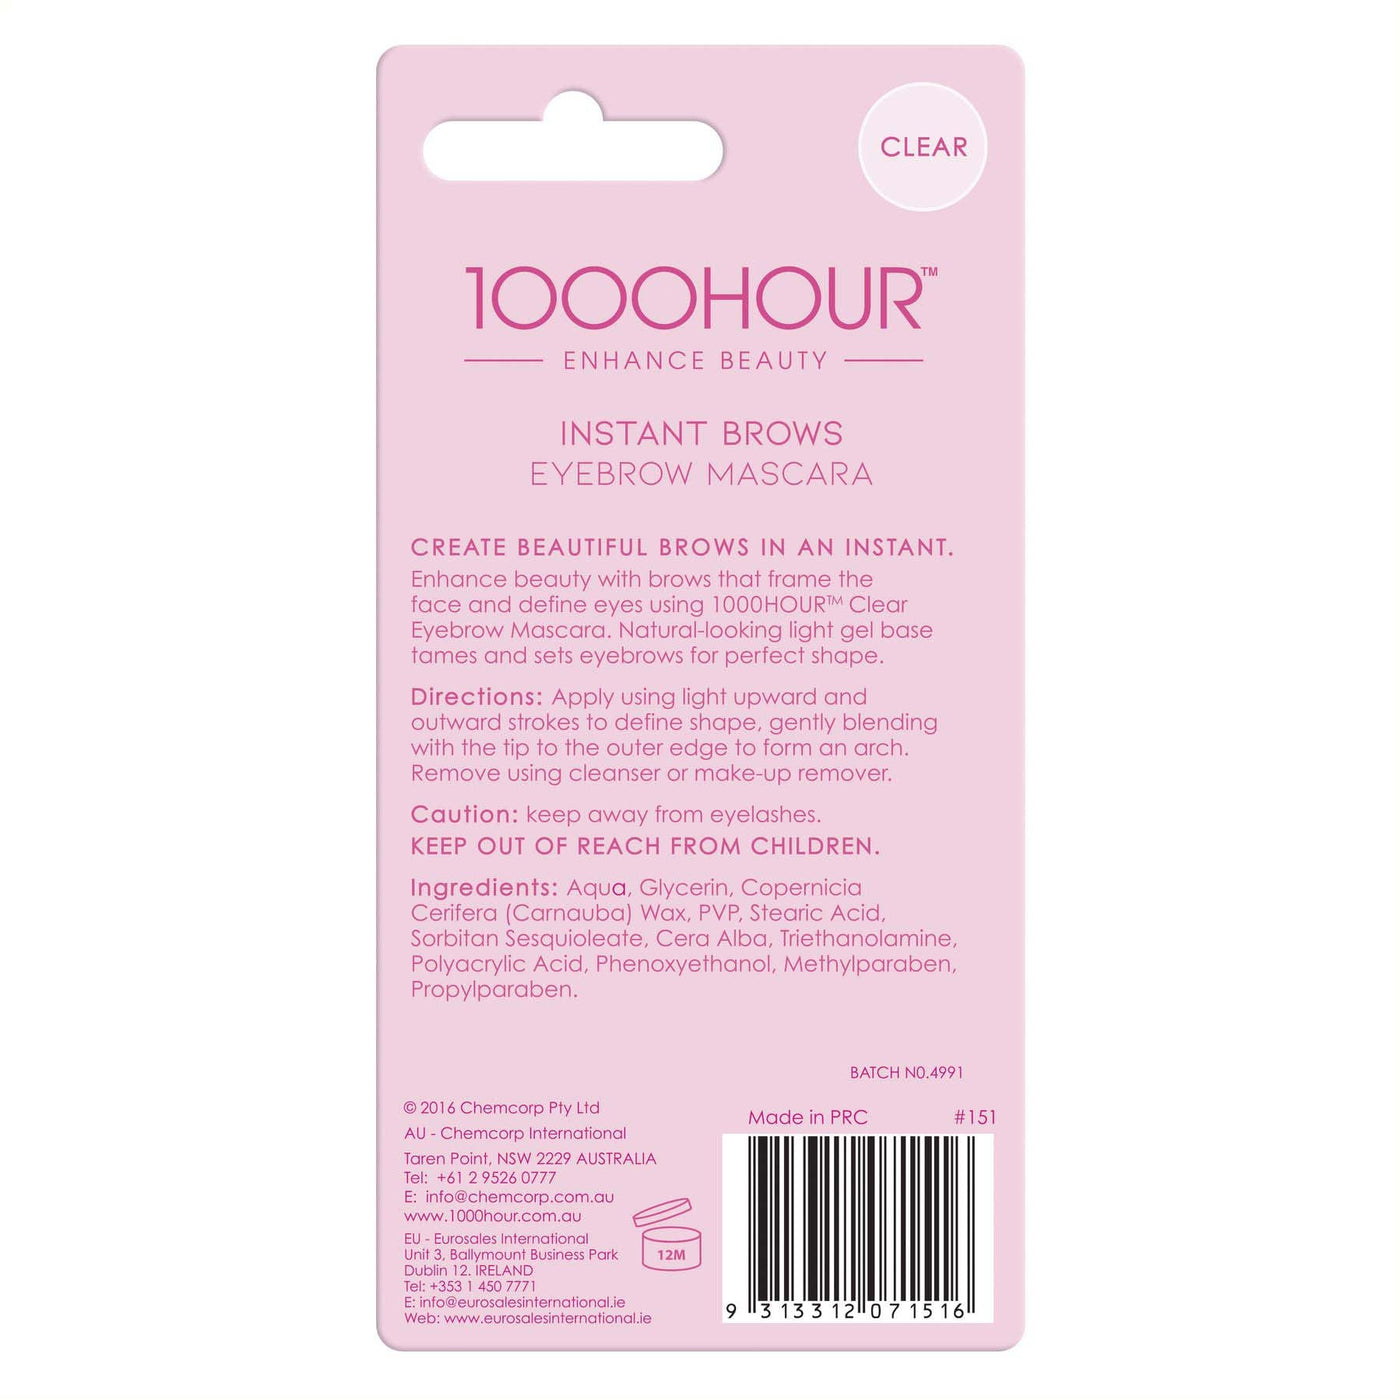 1000 Hour Instant Brows - Clear Eyebrow Mascara for Shaping - Hey Sara